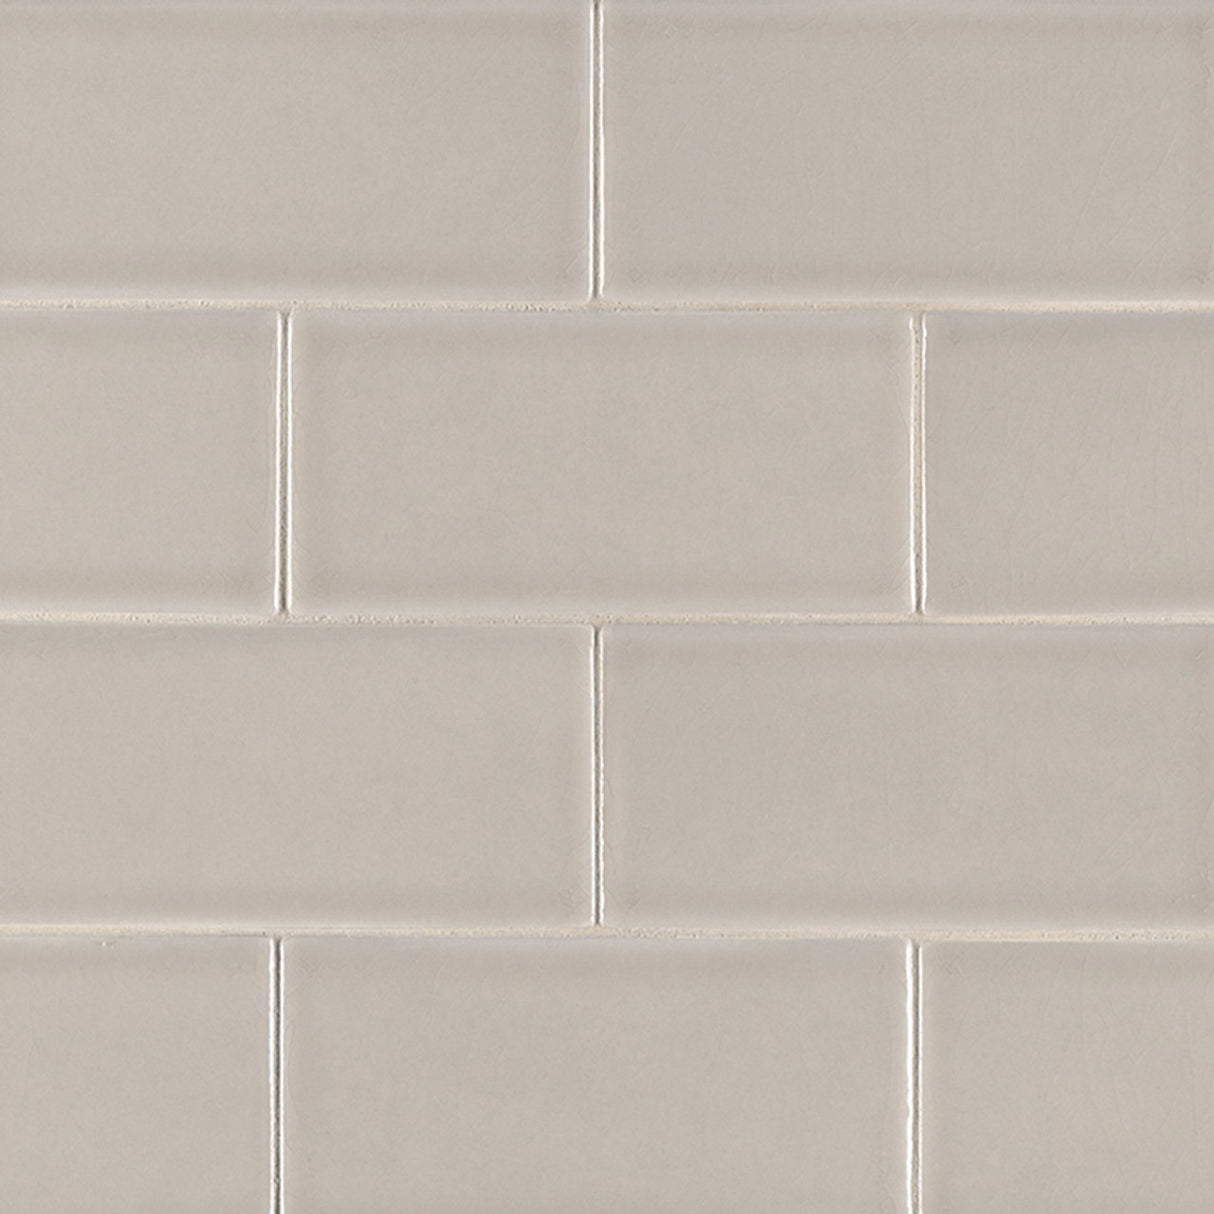 Portico Pearl Handcrafted 3"x6" Glossy Ceramic Wall Tile - MSI Collection HIGHLAND PARK PORTICO PEARL SUBWAY TILE 3X6 (Case)